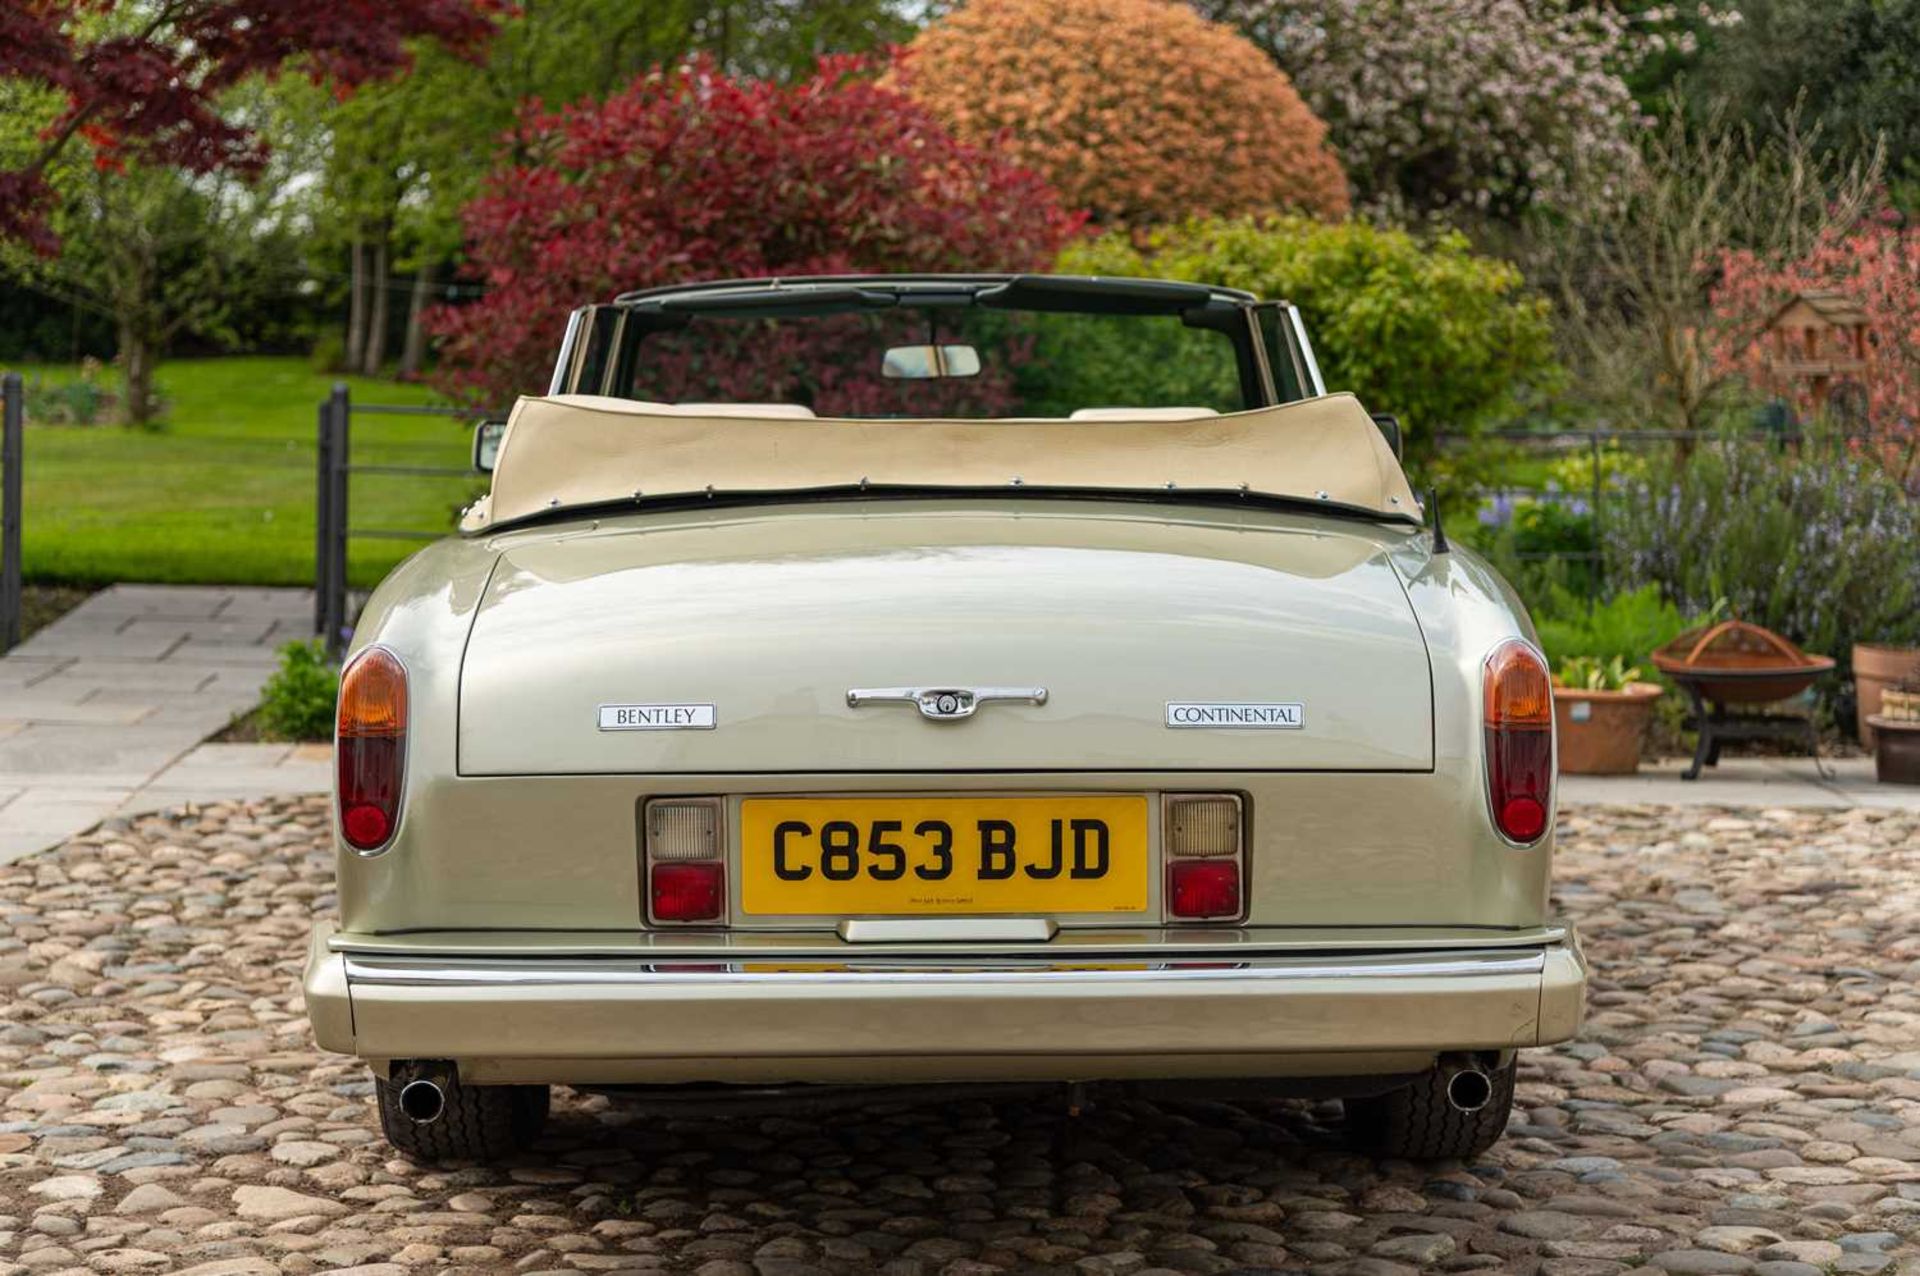 1985 Bentley Continental Convertible Rare early carburettor model by Mulliner Park Ward - Image 4 of 76